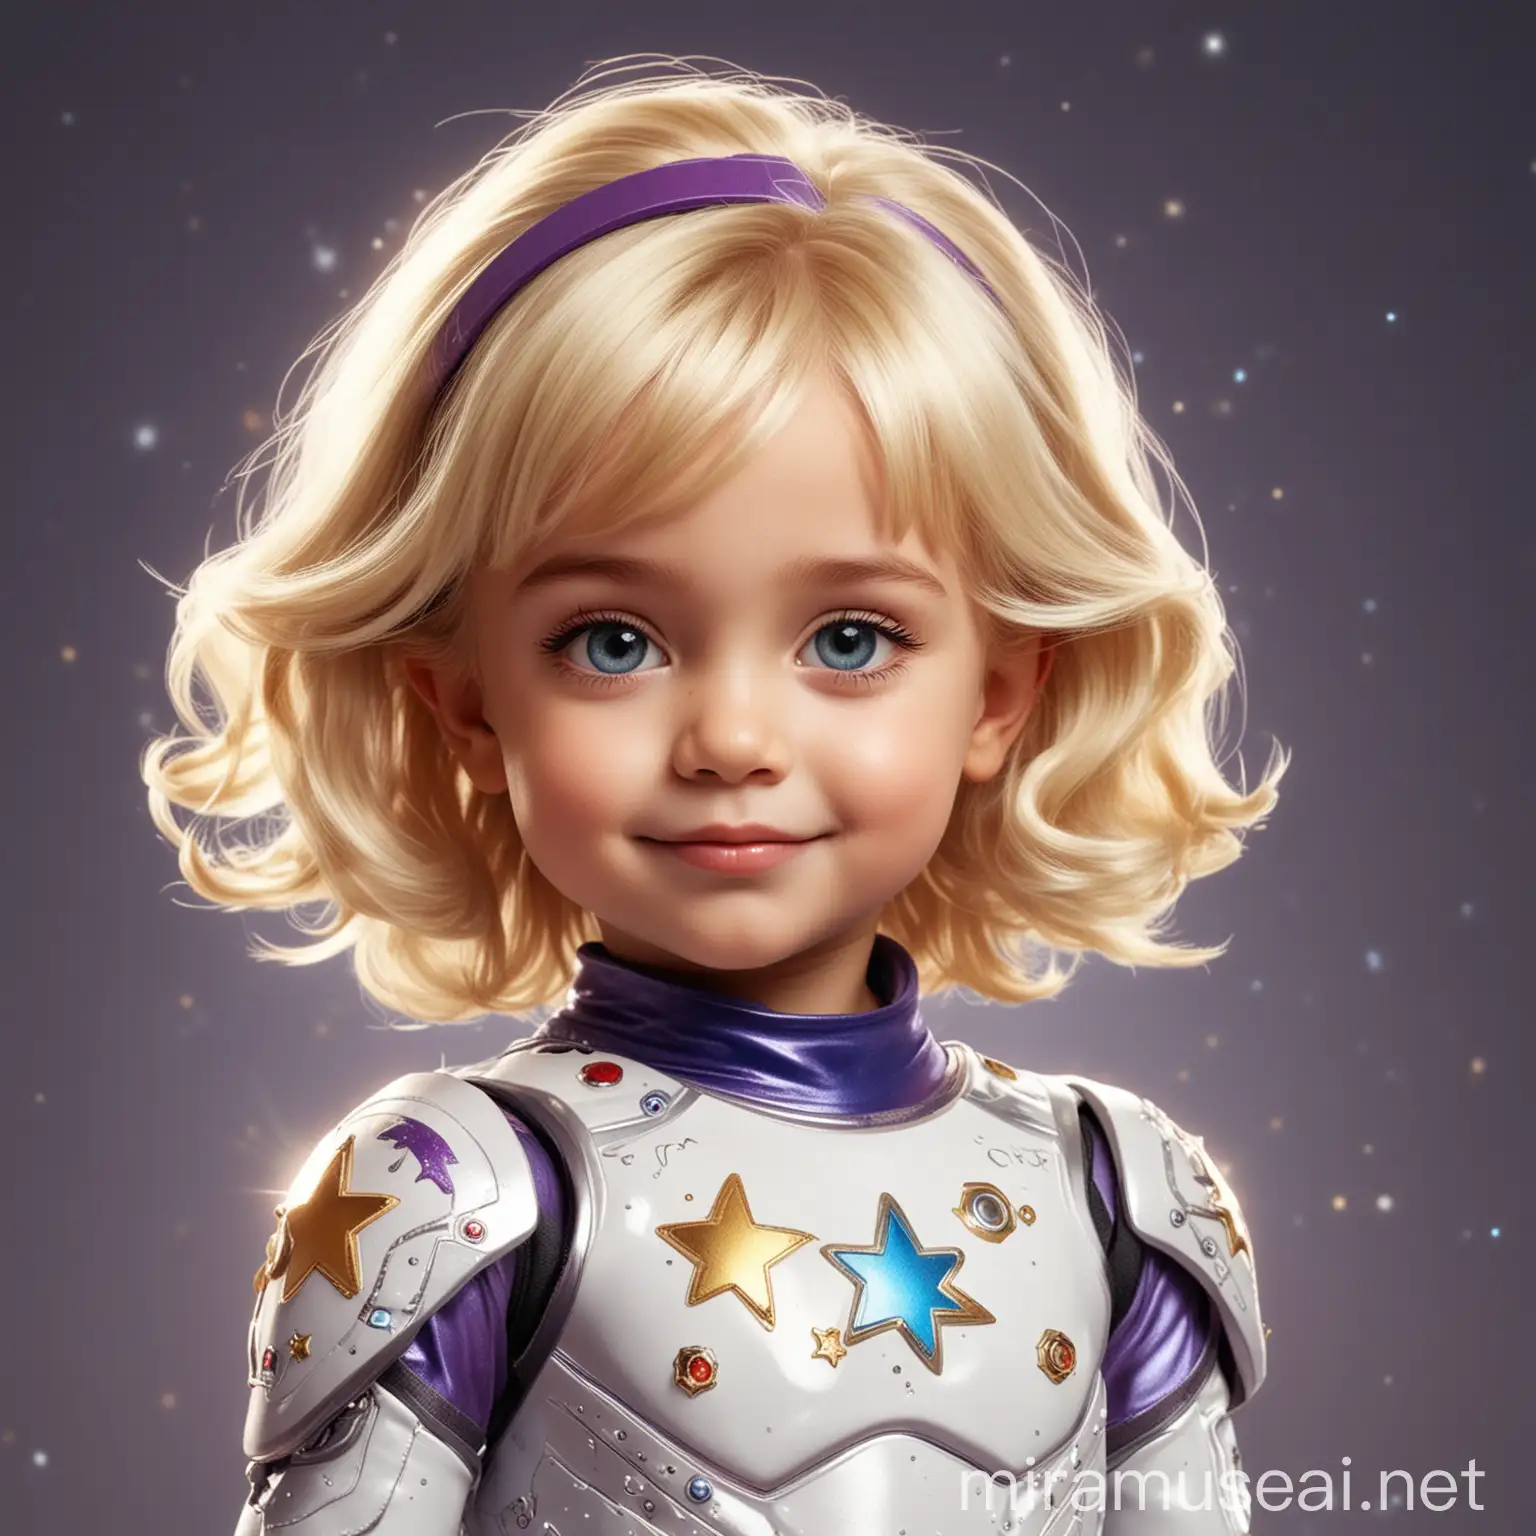 Blonde Cartoon Astrogirl Young Caucasian Girl with Cosmic Ambition